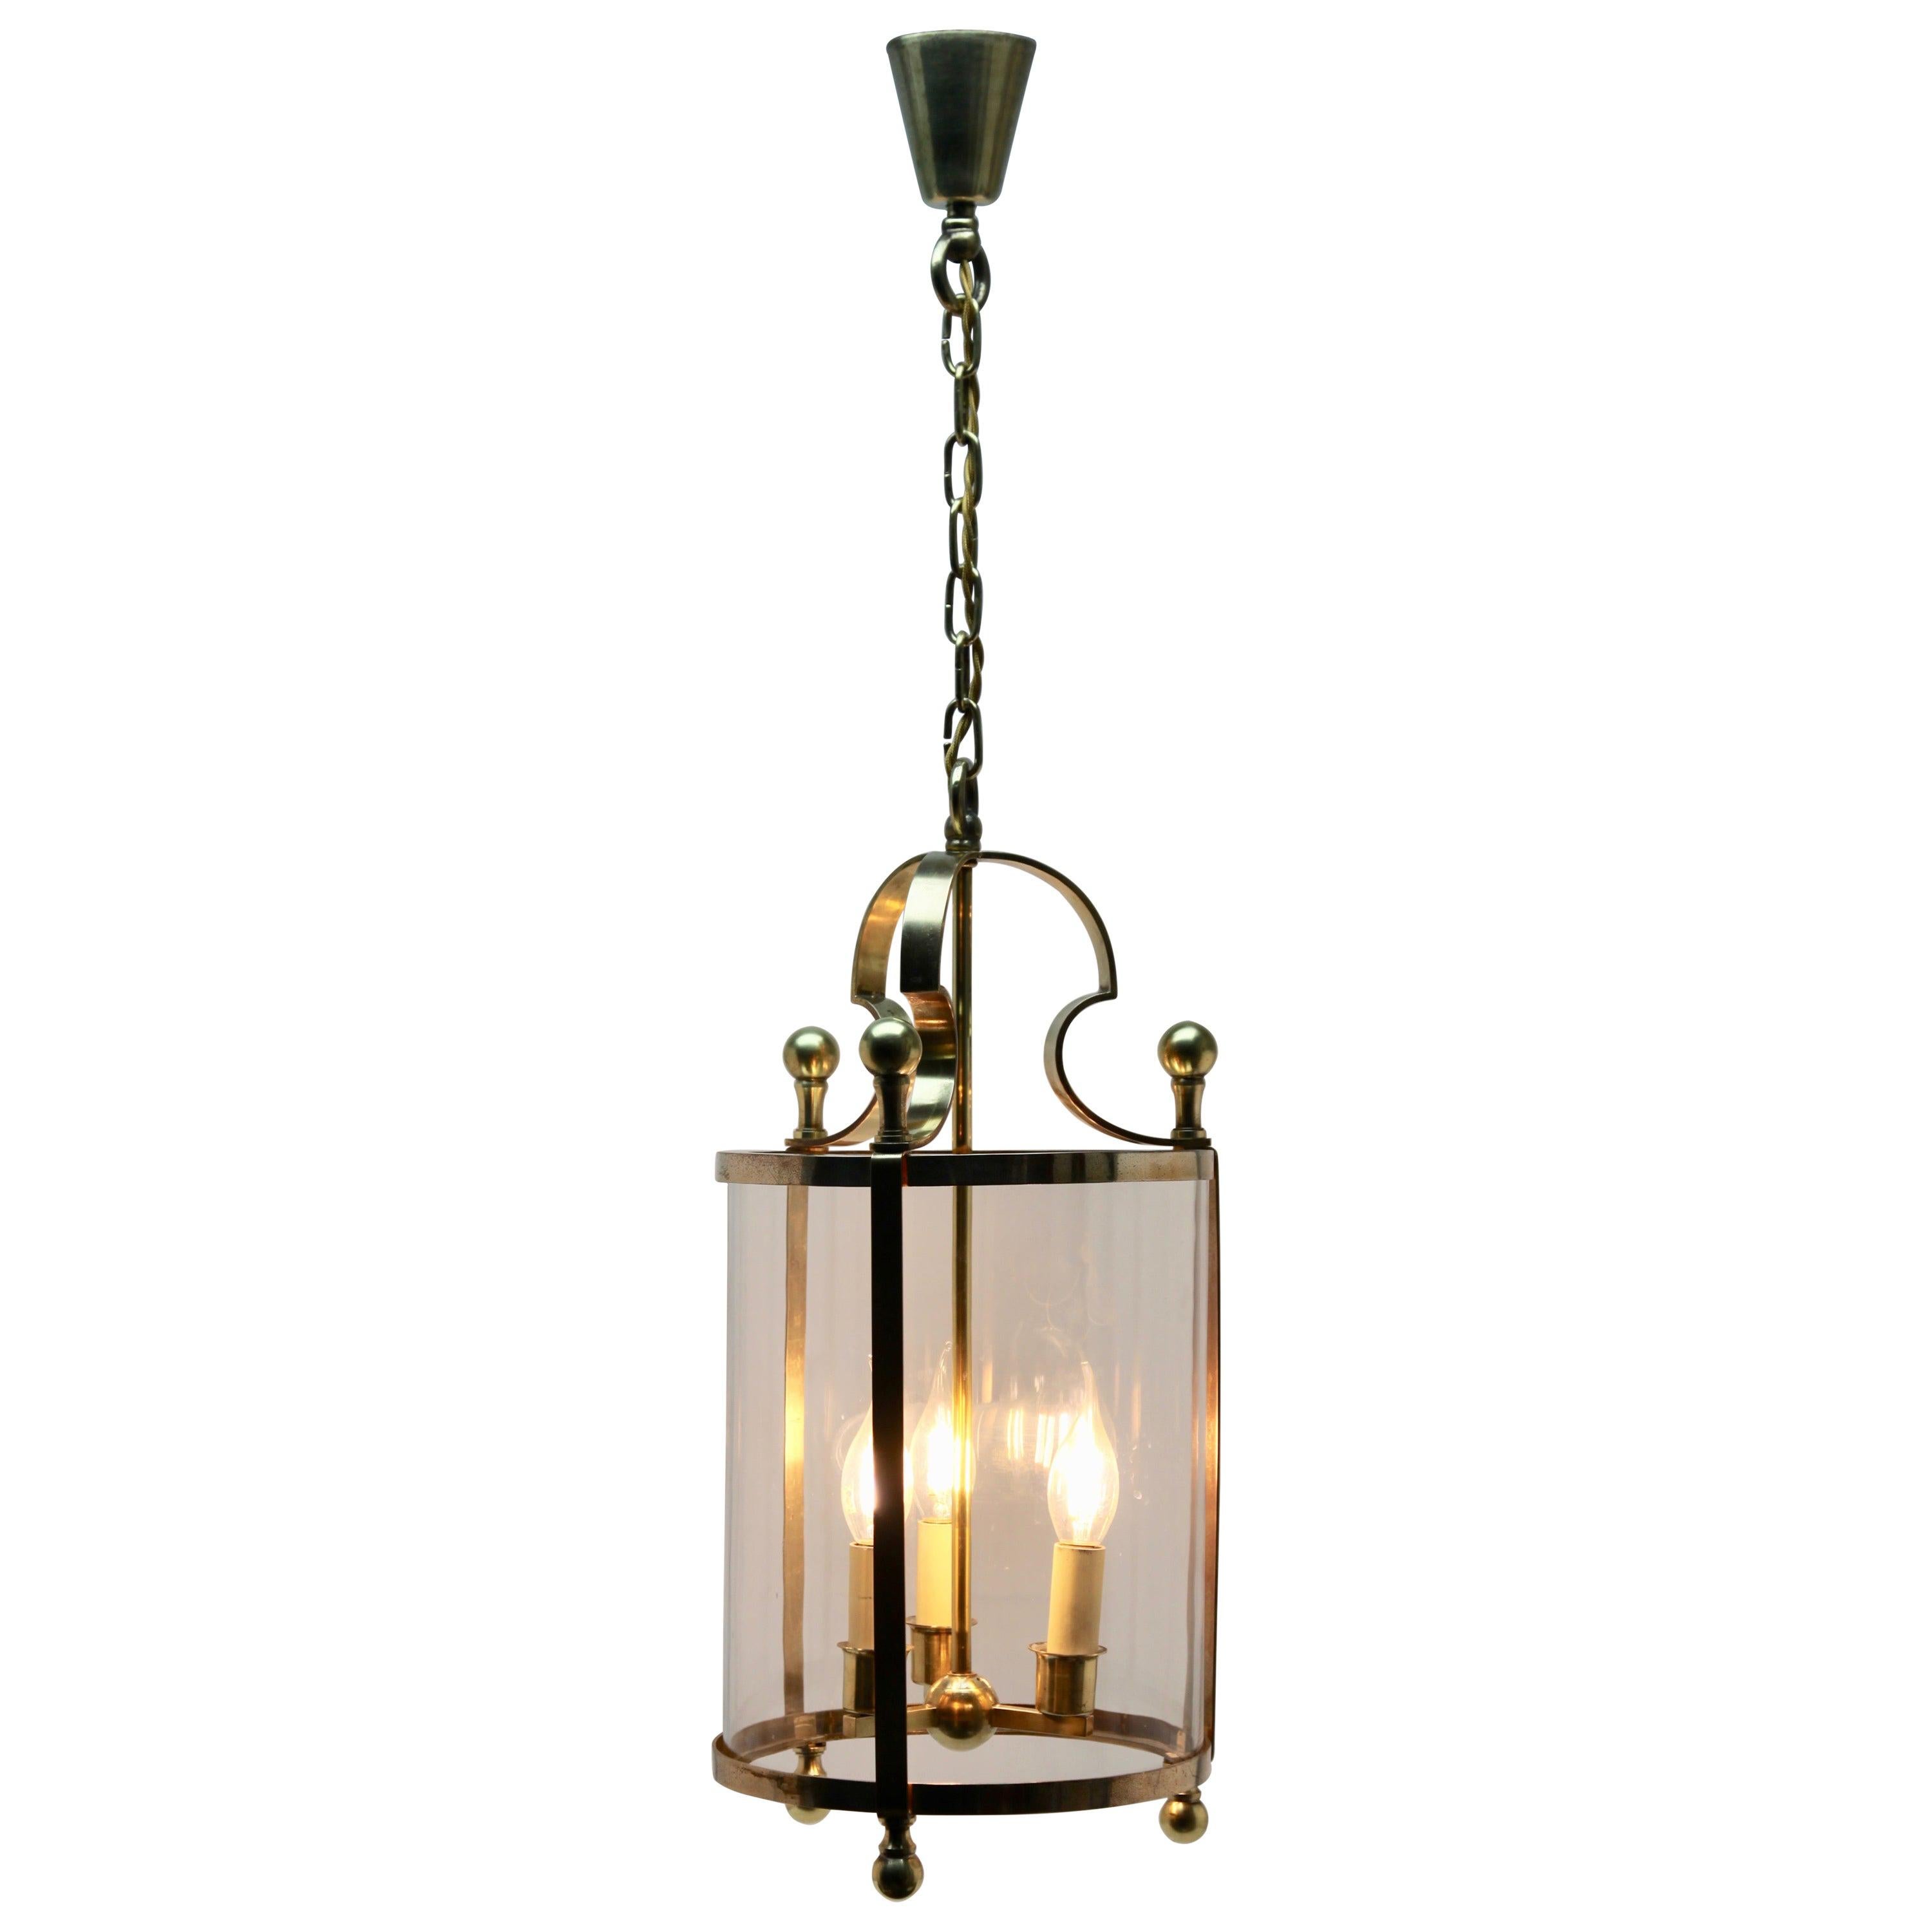 Solid Brass and Glass Lantern or Pendant Lamp